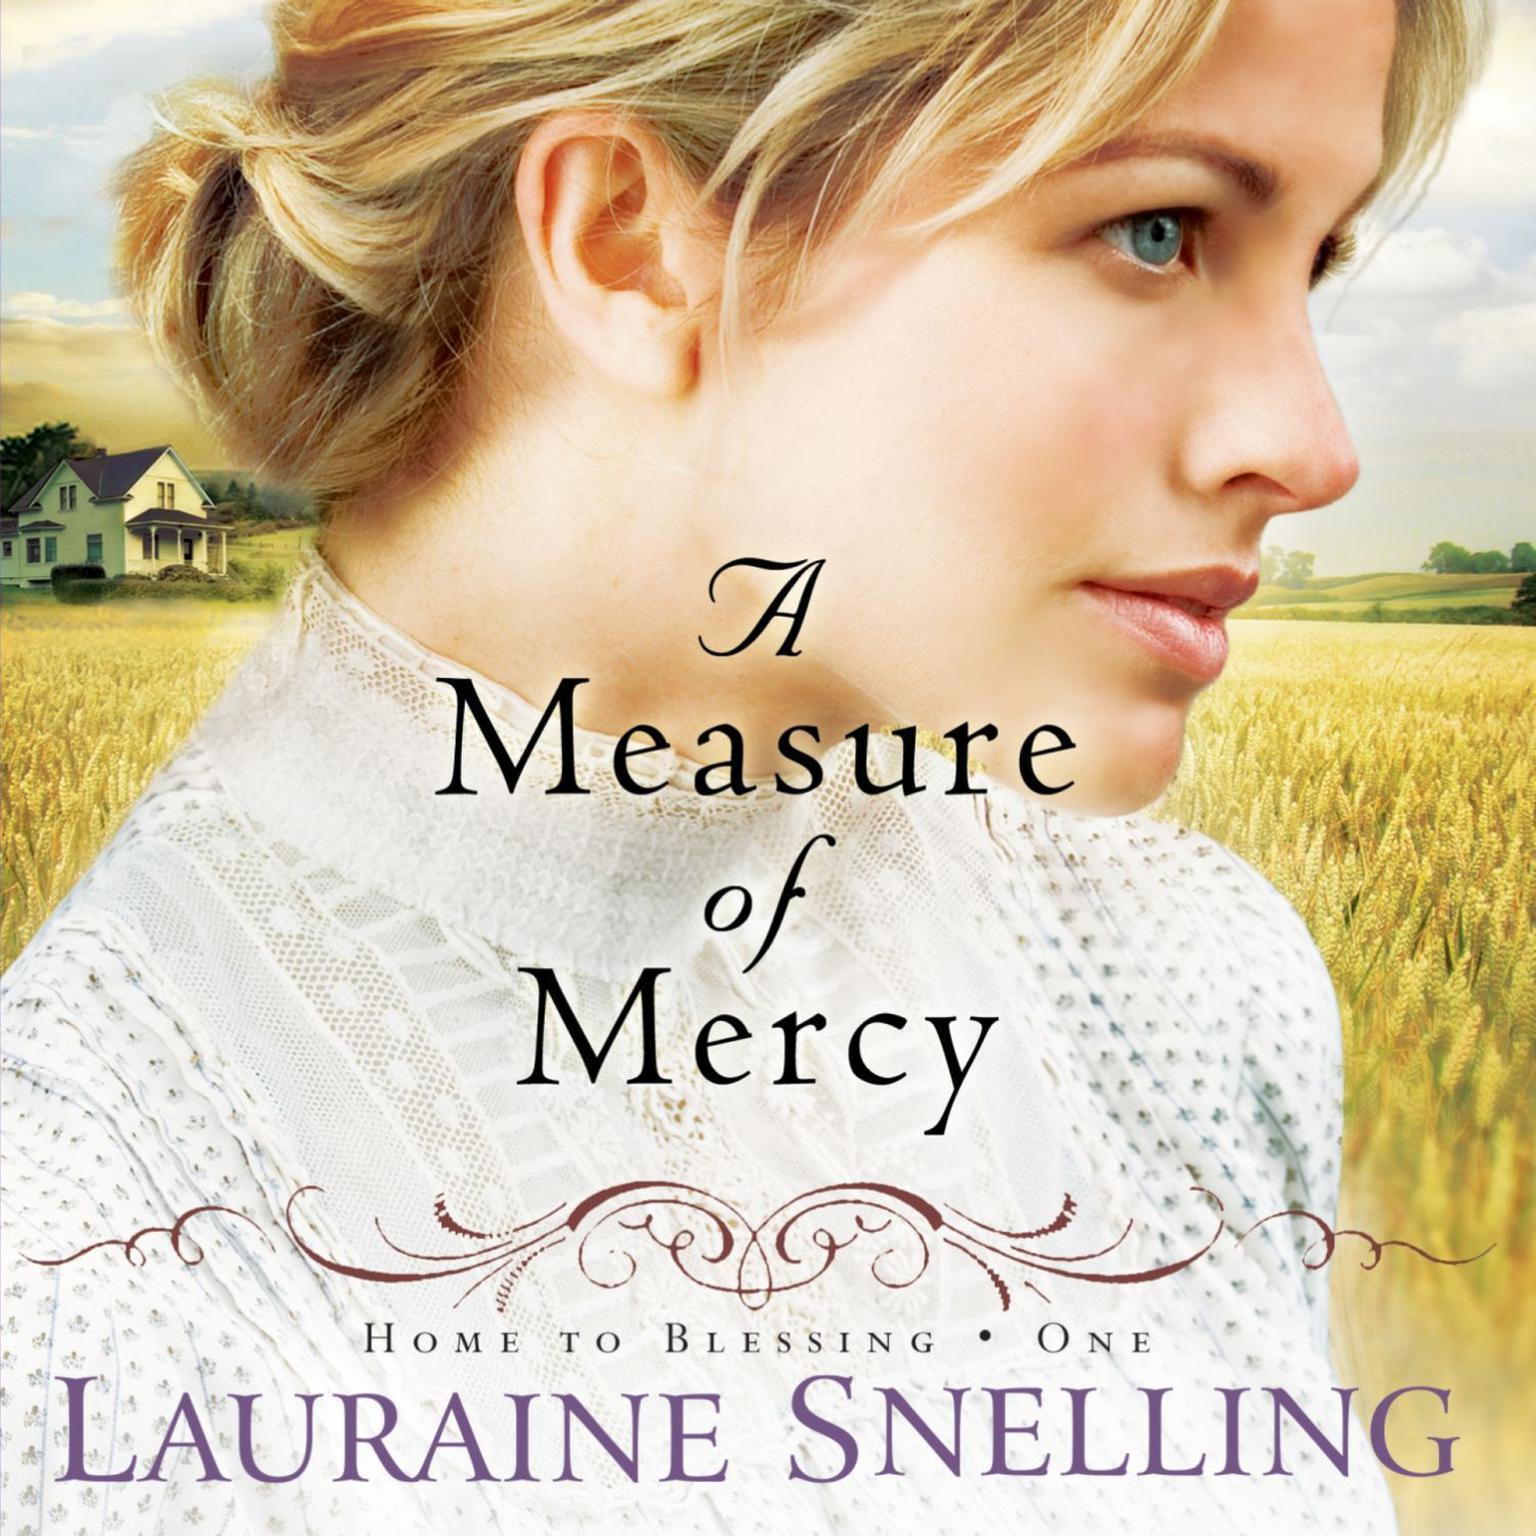 A Measure of Mercy (Abridged) Audiobook, by Lauraine Snelling